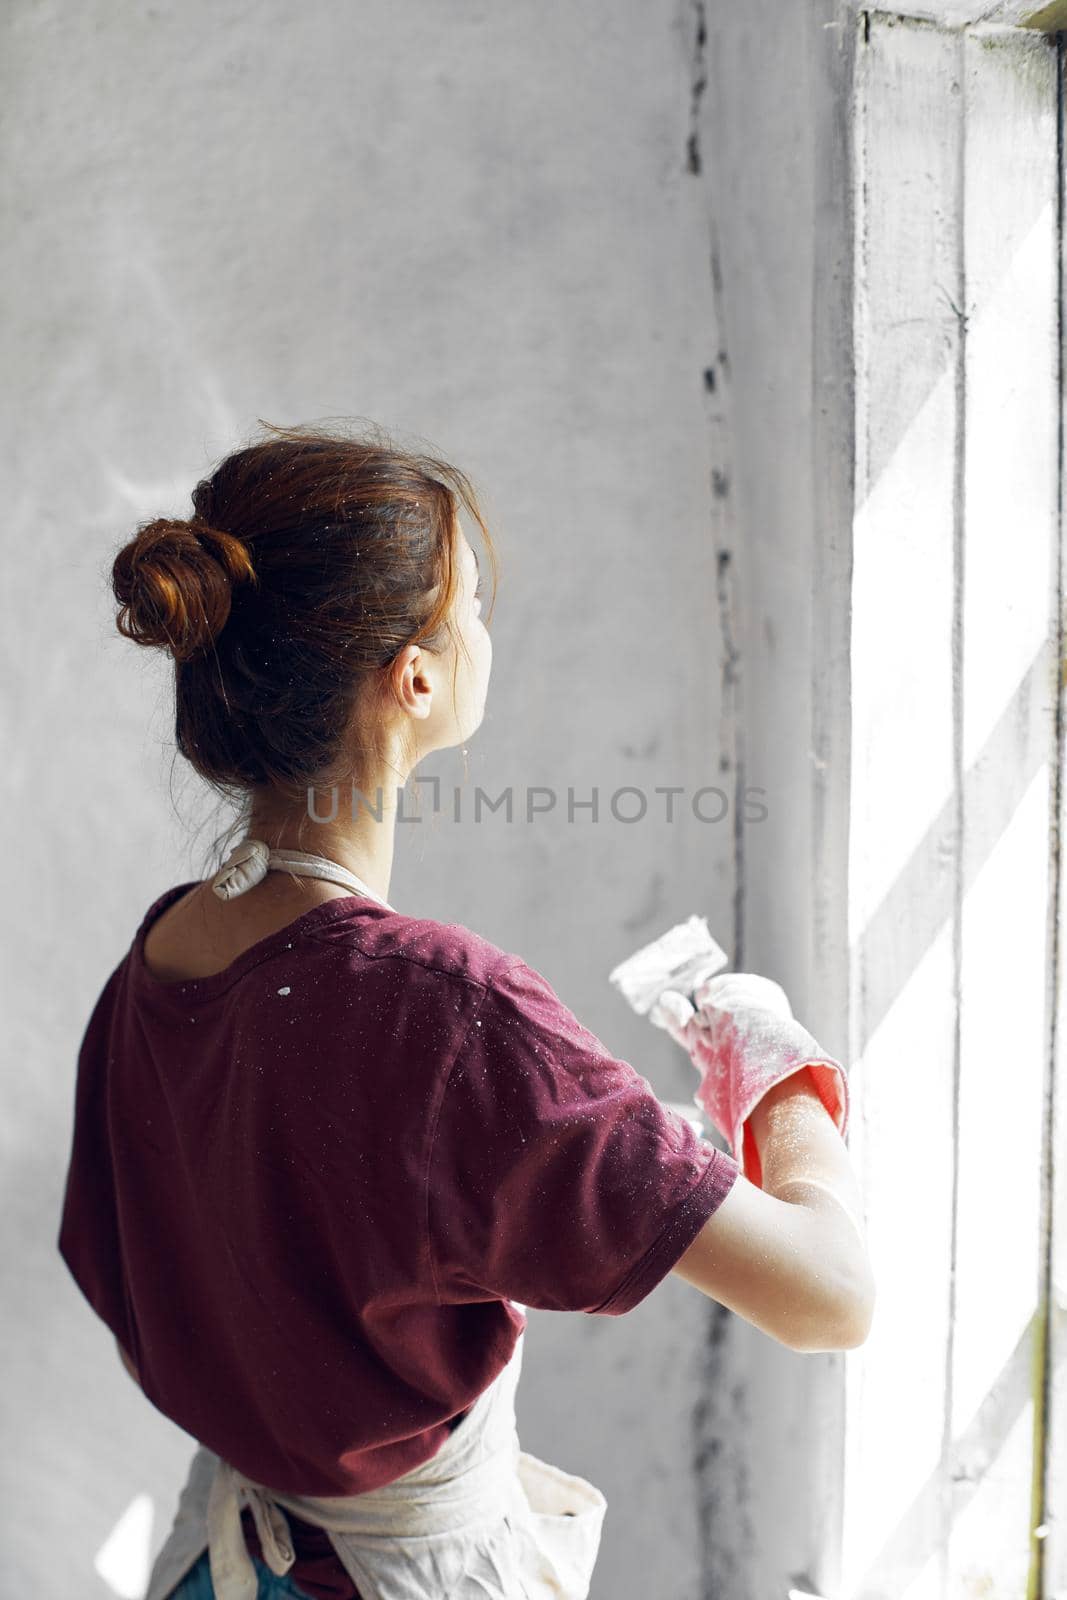 Woman in a white apron paints a window in a house interior renovation by Vichizh